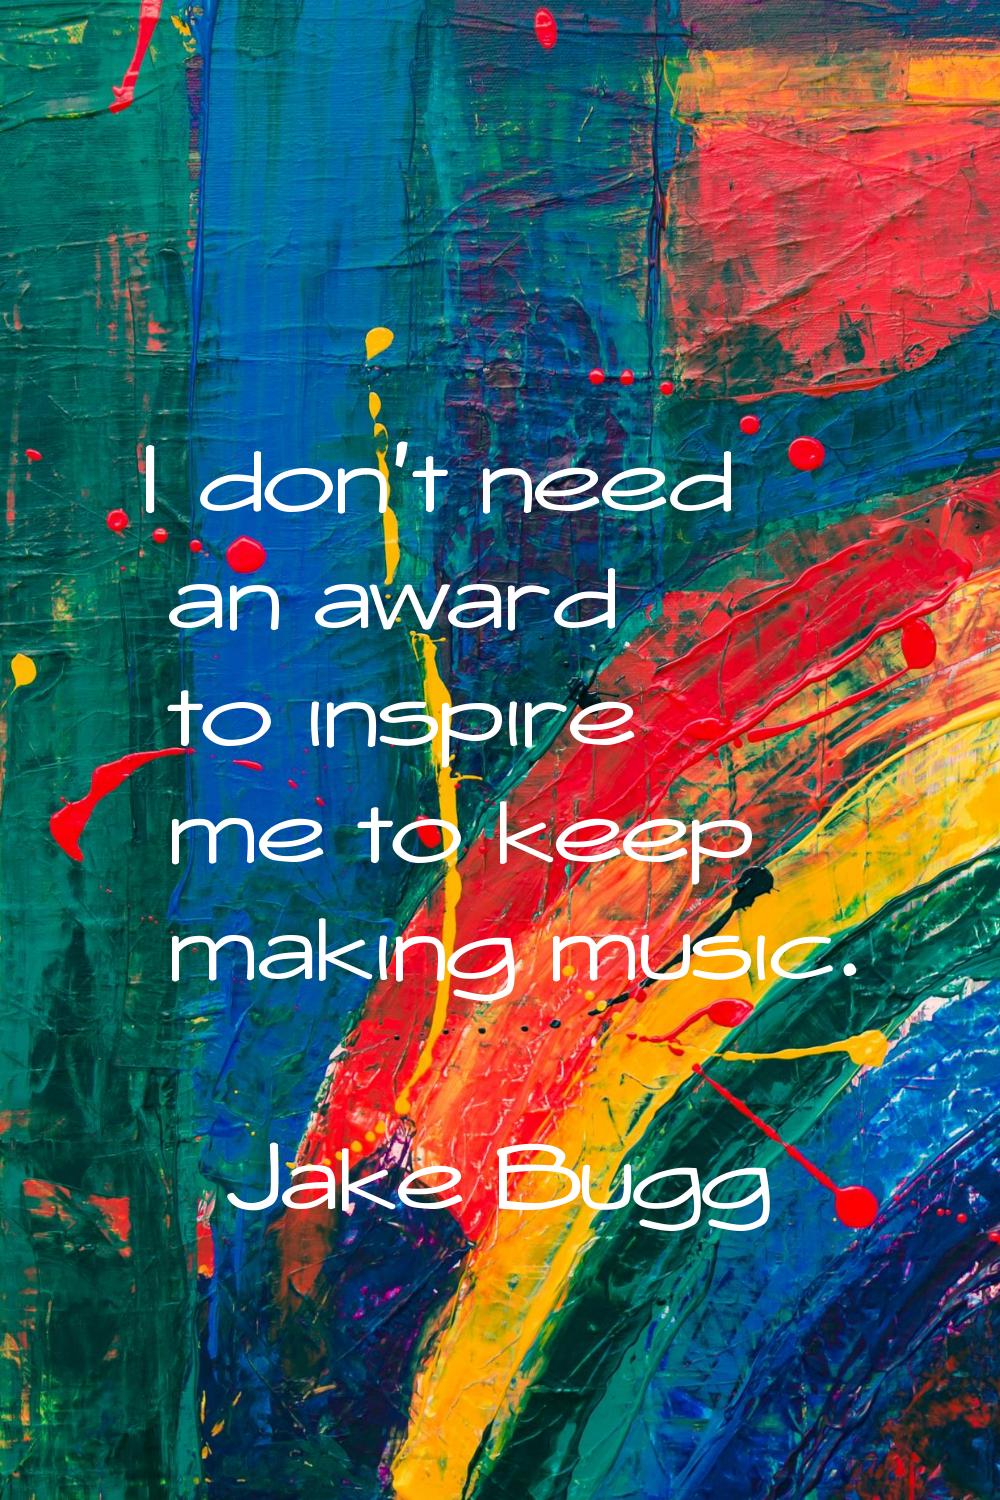 I don't need an award to inspire me to keep making music.